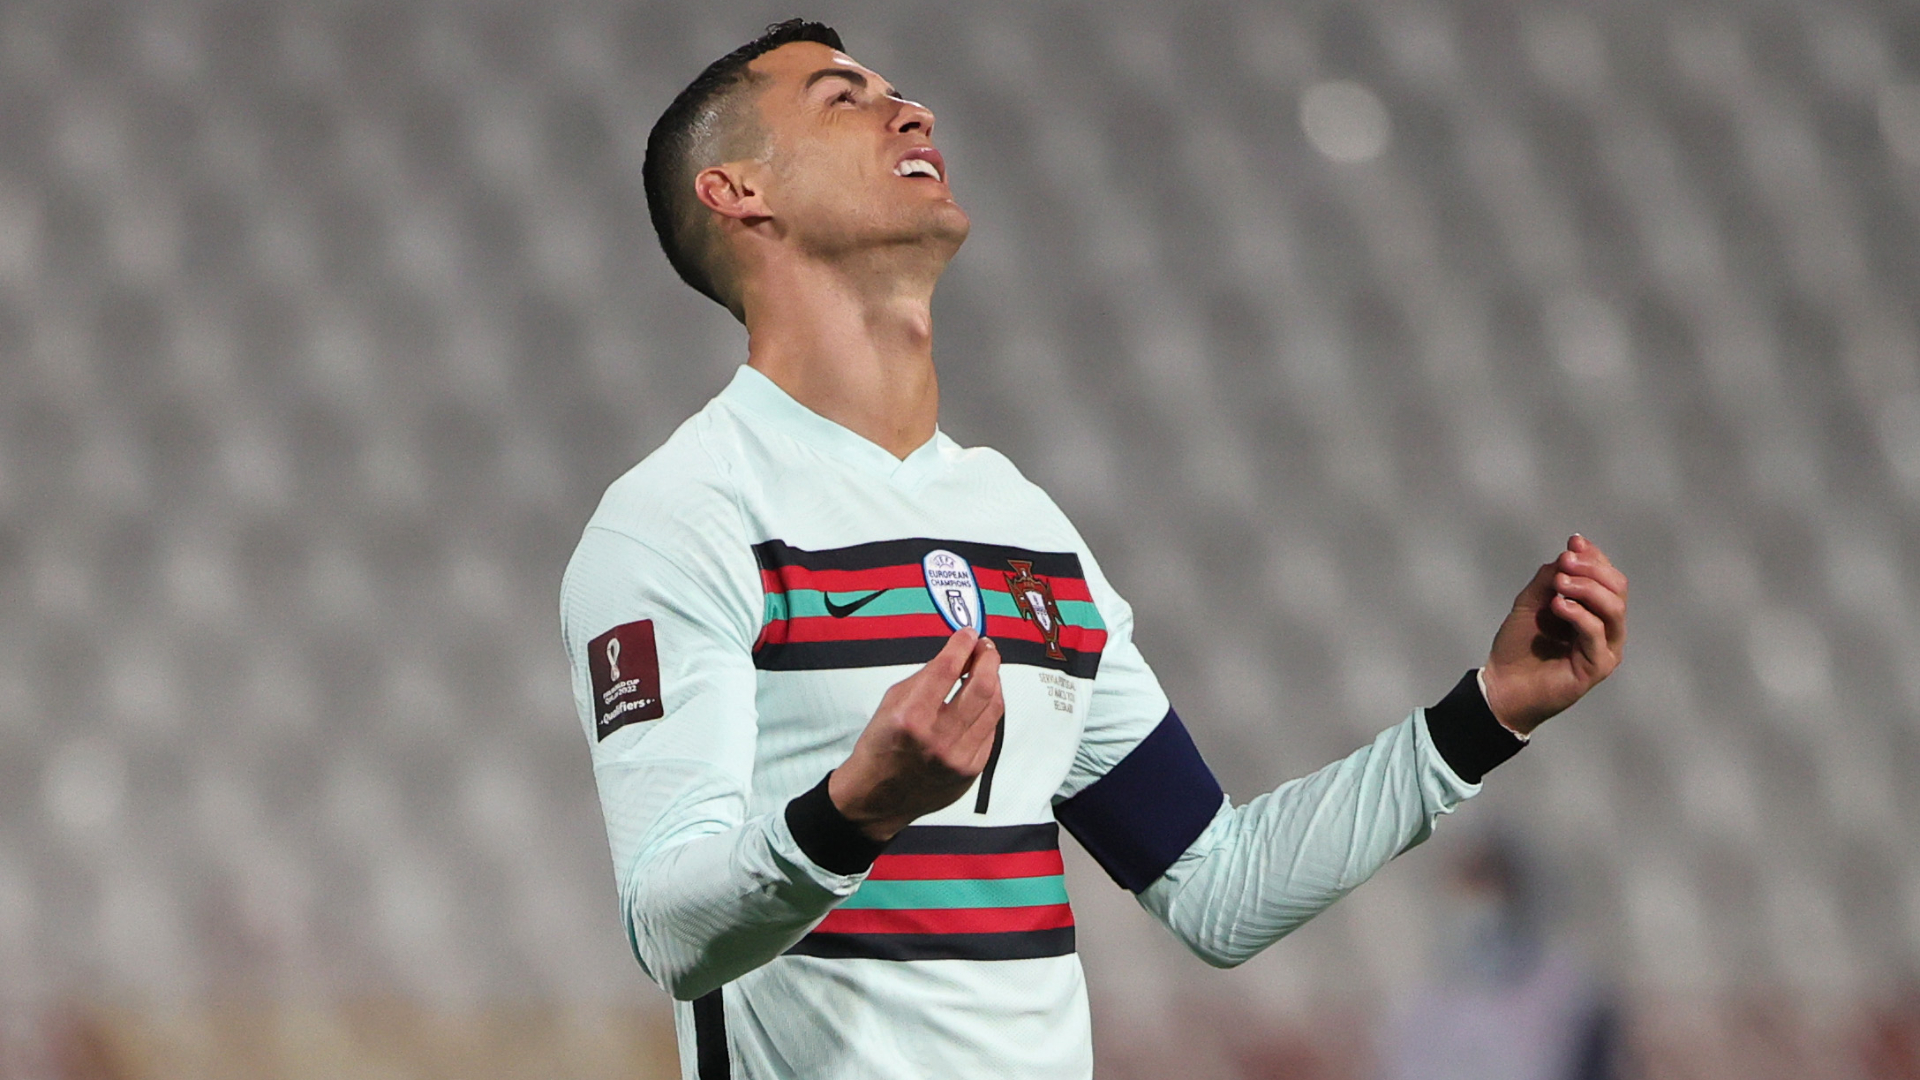 Ronaldo's reaction was unacceptable as captain' - Portugal star set bad  example after disallowed goal, says Meira | Goal.com